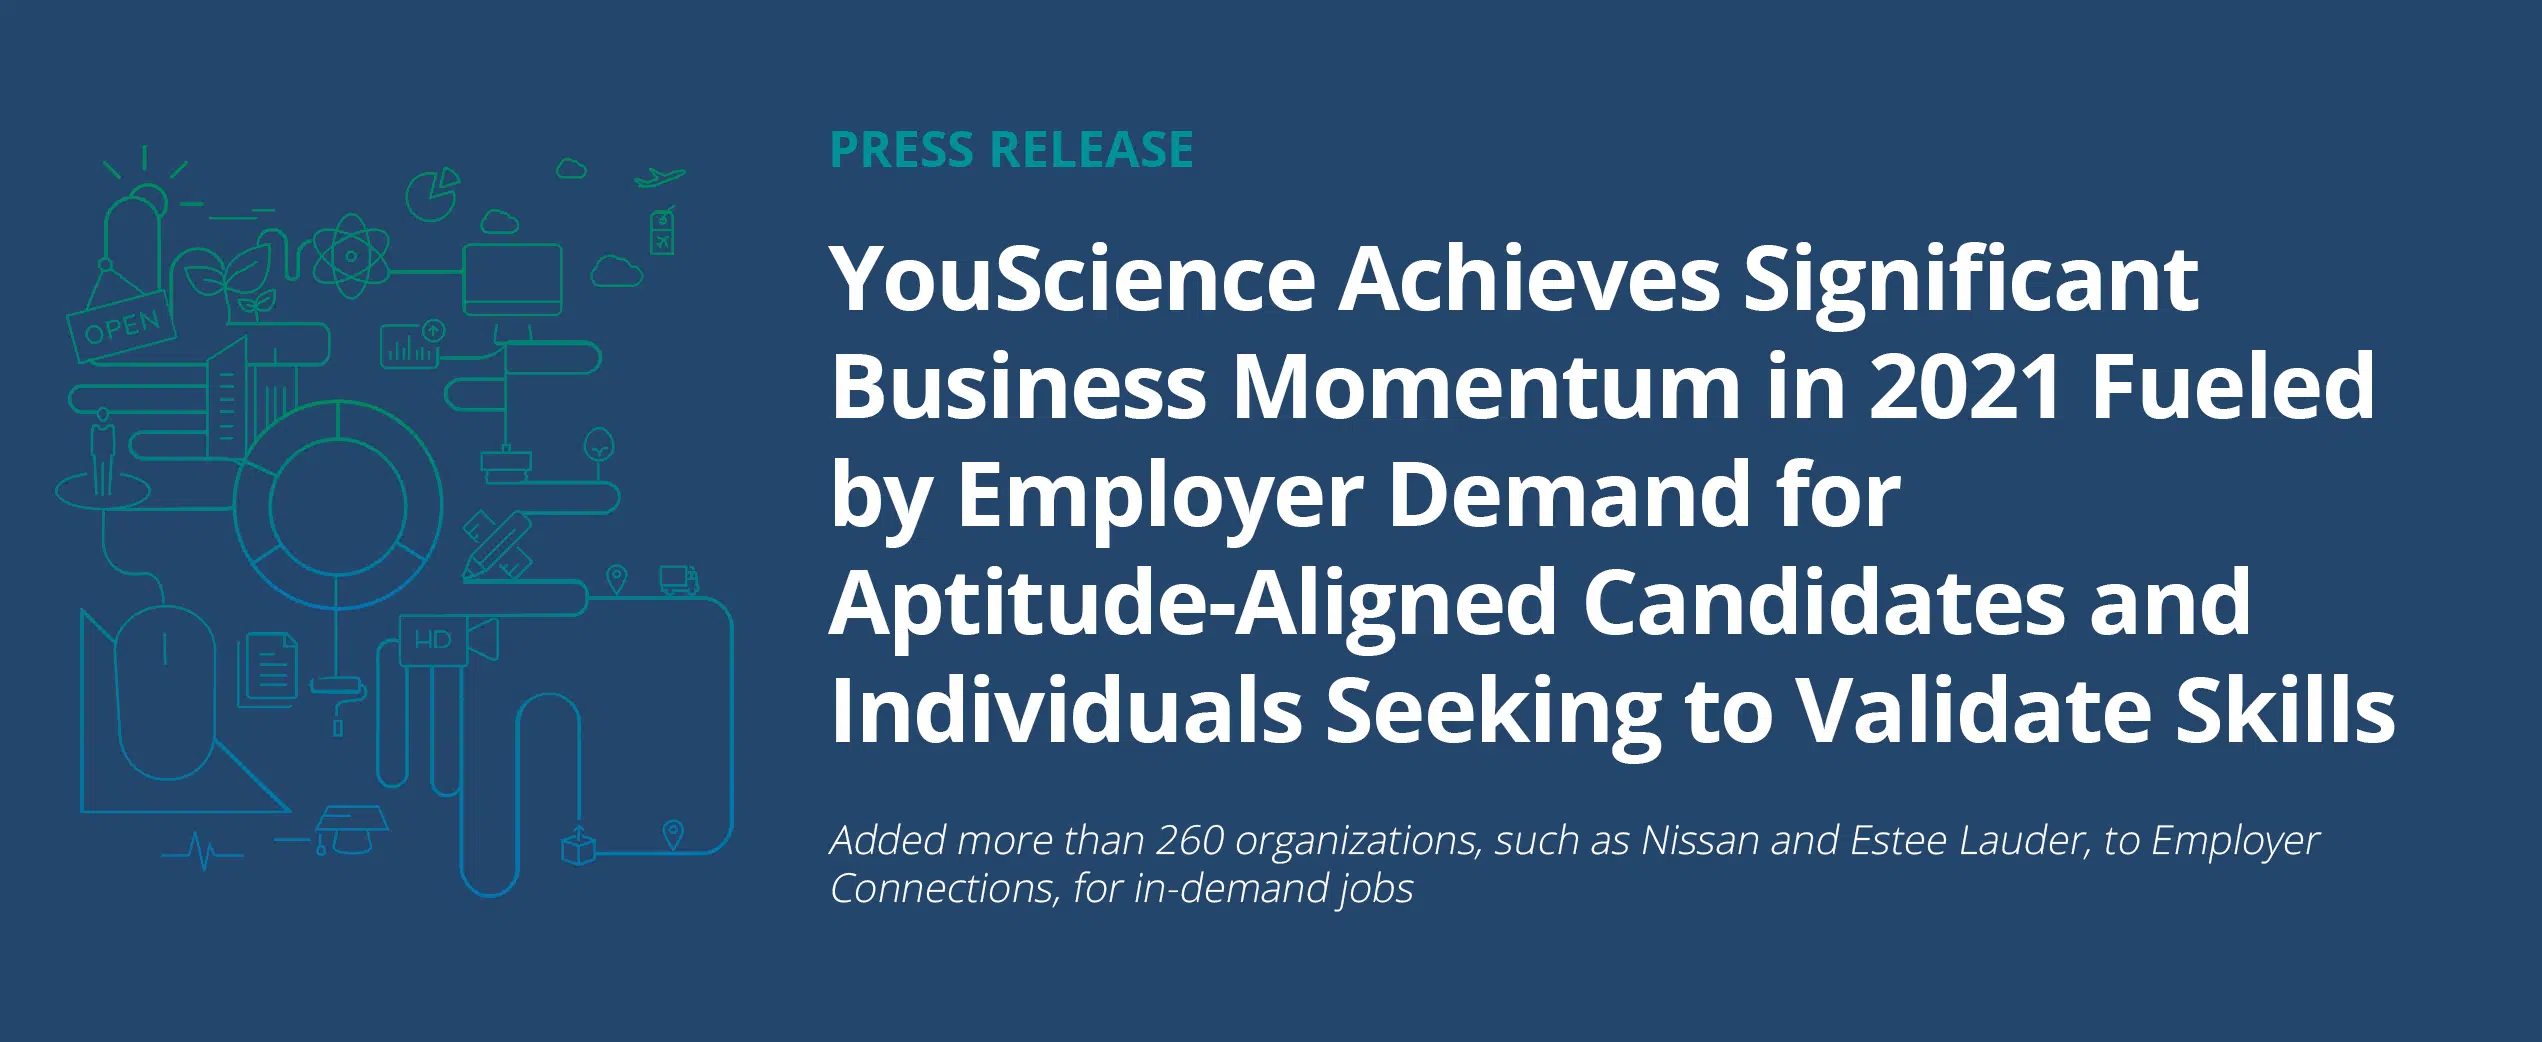 YouScience Achieves Significant Business Momentum in 2021 Fueled by Employer Demand for Aptitude-Aligned Candidates and Individuals Seeking to Validate Skills